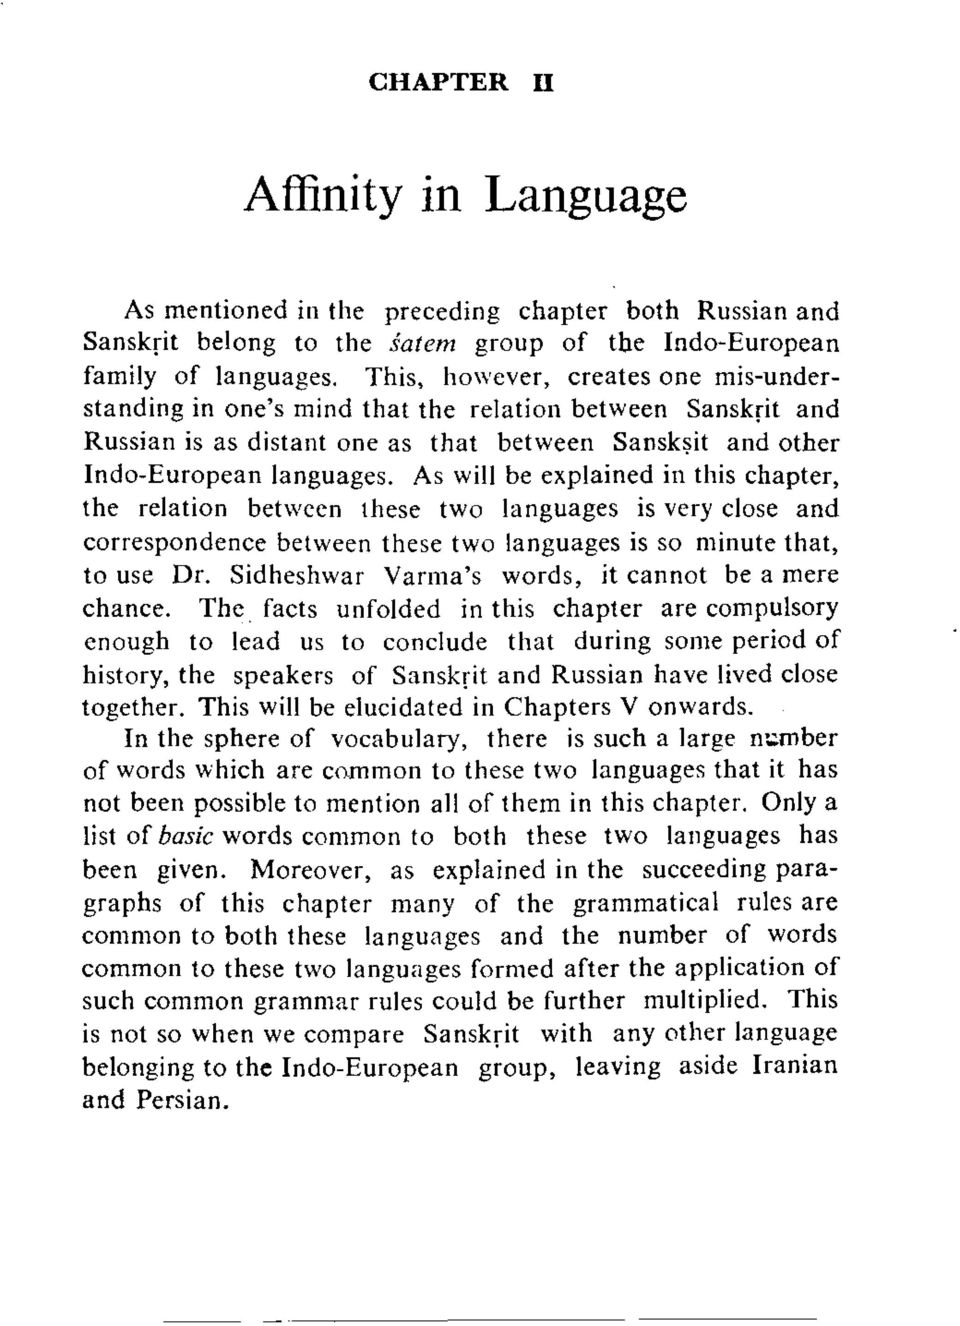 As will be explained in this chapter, the relation between these two languages is very close and correspondence between these two languages is so minute that, to use Dr.